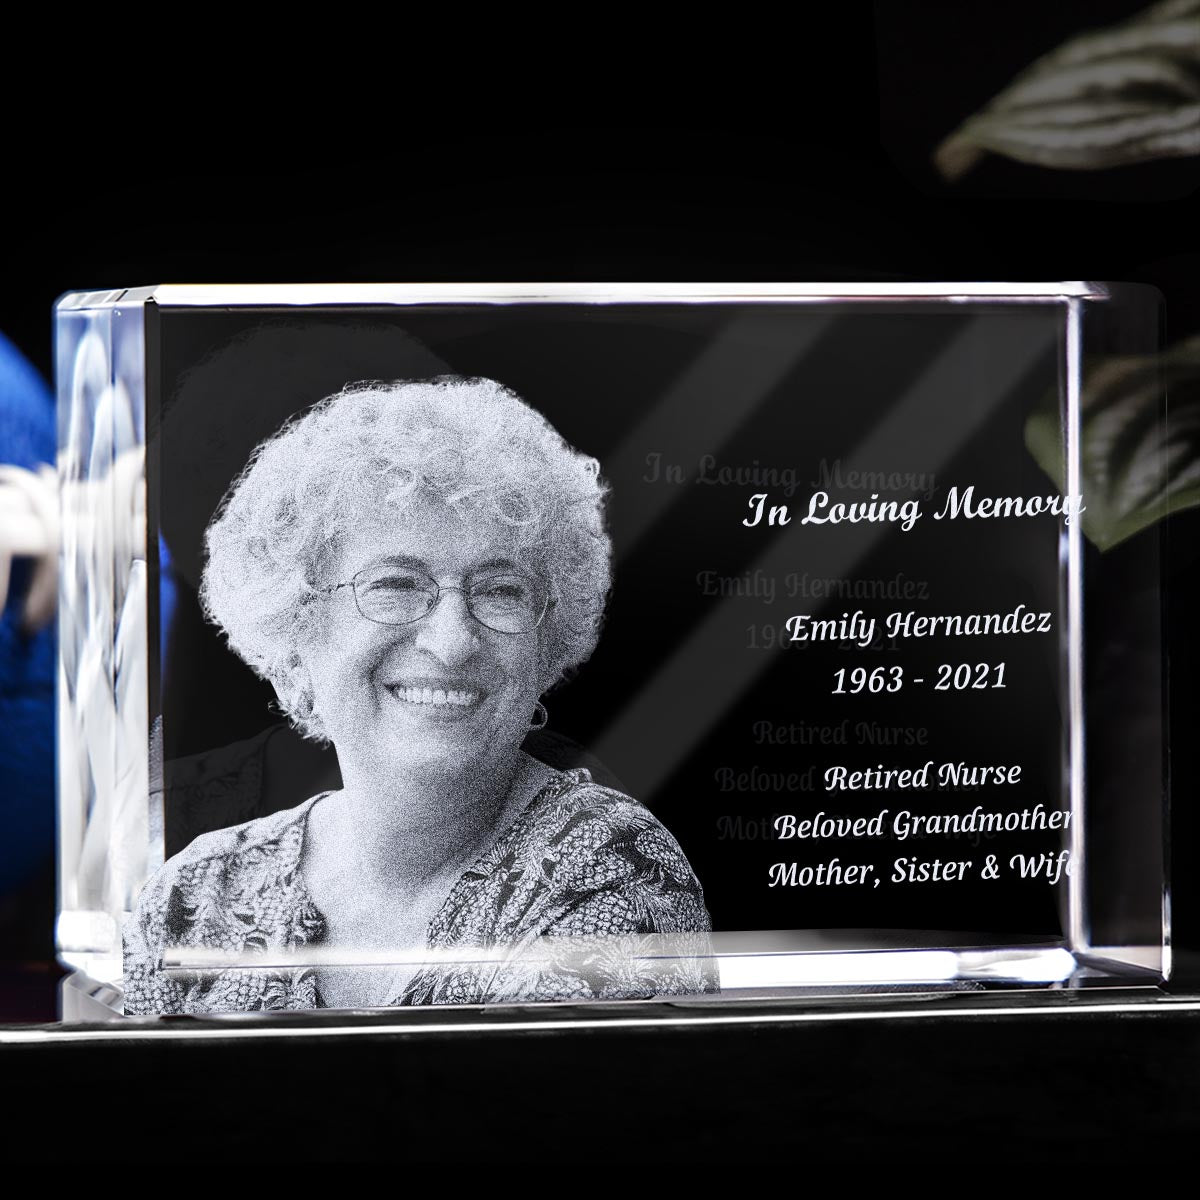 In Loving Memory - Memorial gift for loss of - Personalized Laser Engraving 3D Cuboid Shaped Crystal Lamp